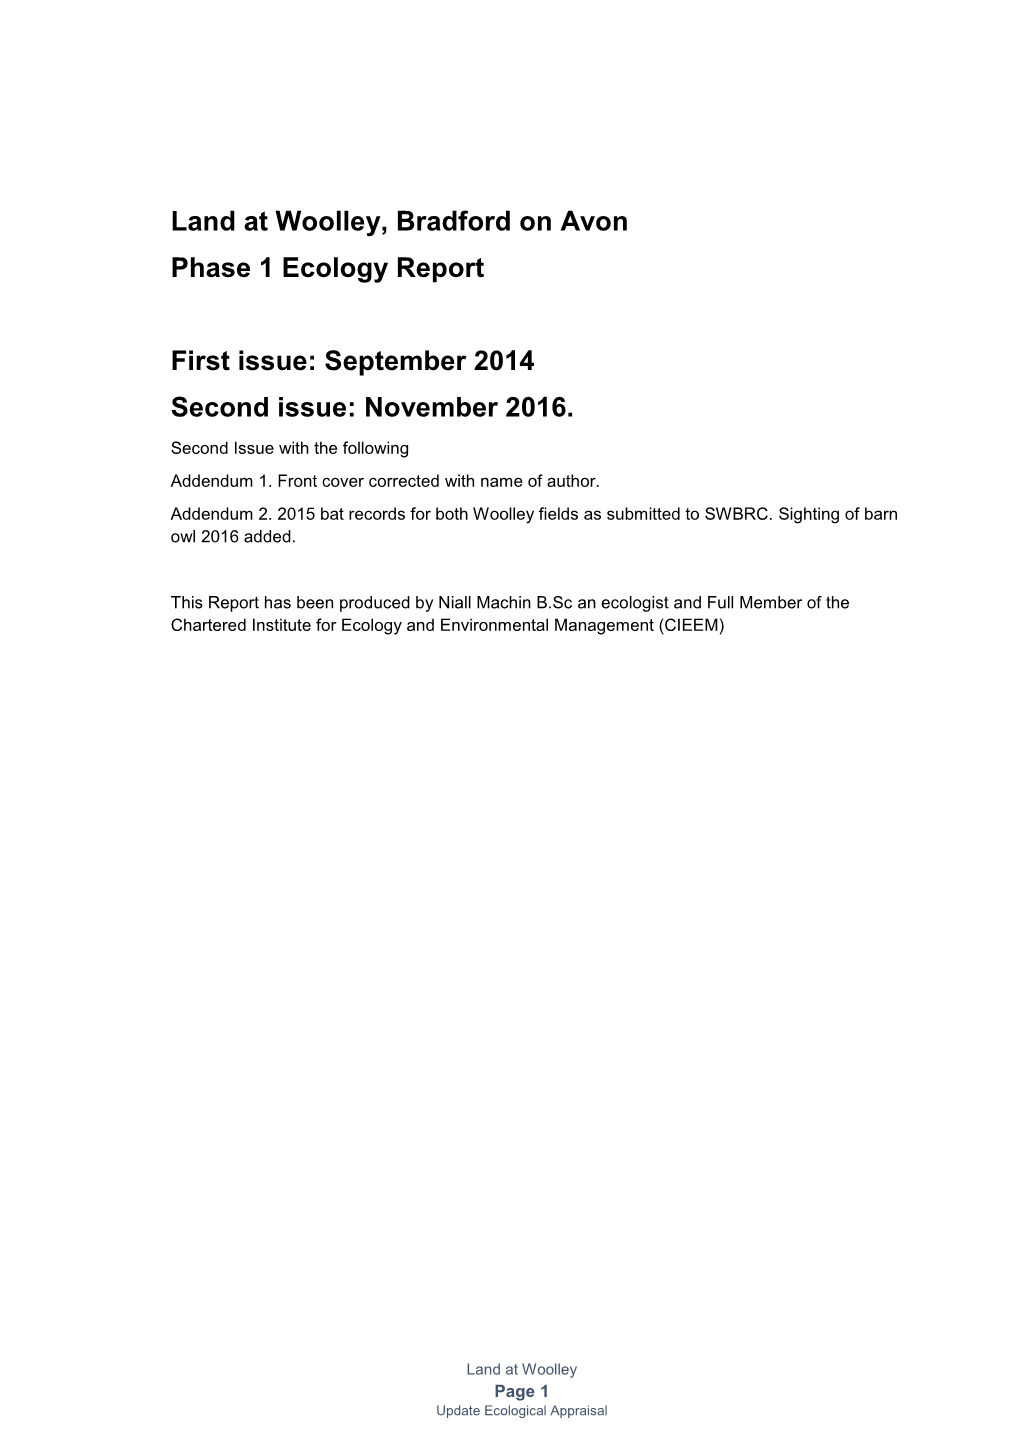 Land at Woolley, Bradford on Avon Phase 1 Ecology Report First Issue